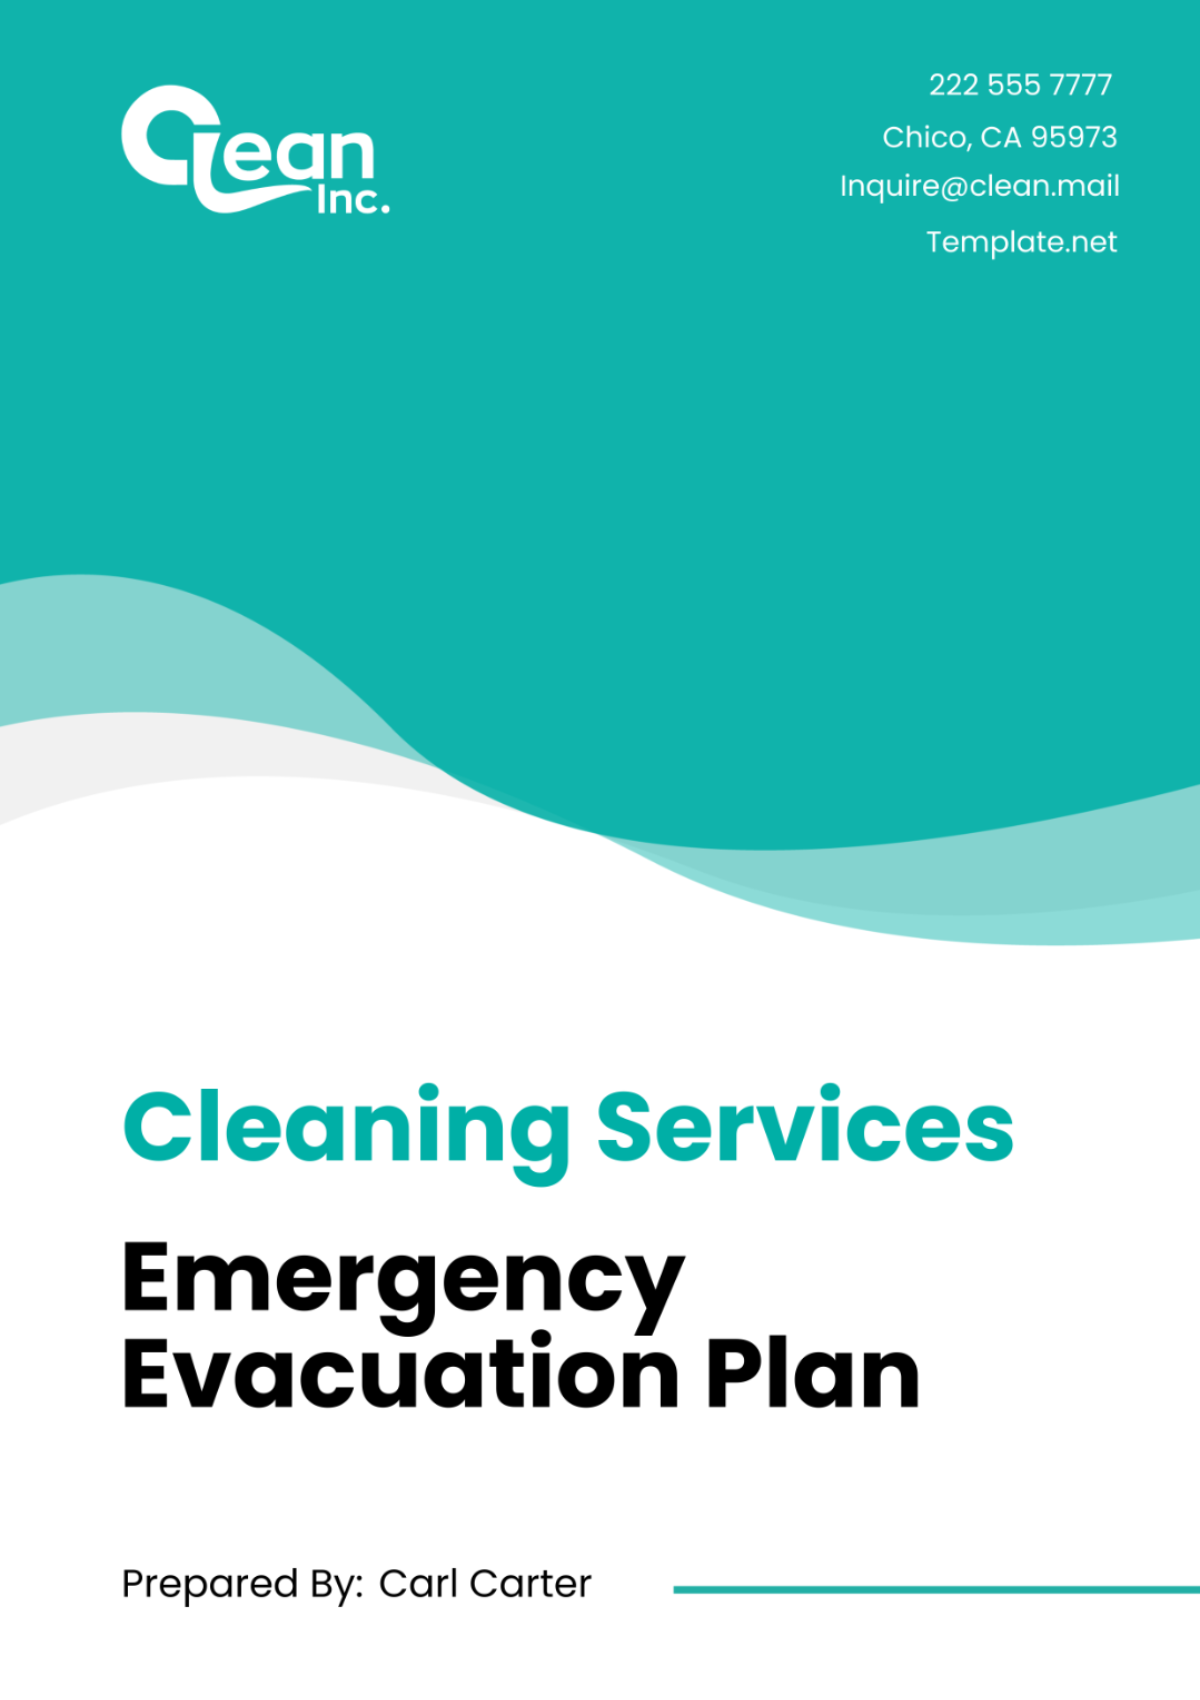 Cleaning Services Emergency Evacuation Plan Template